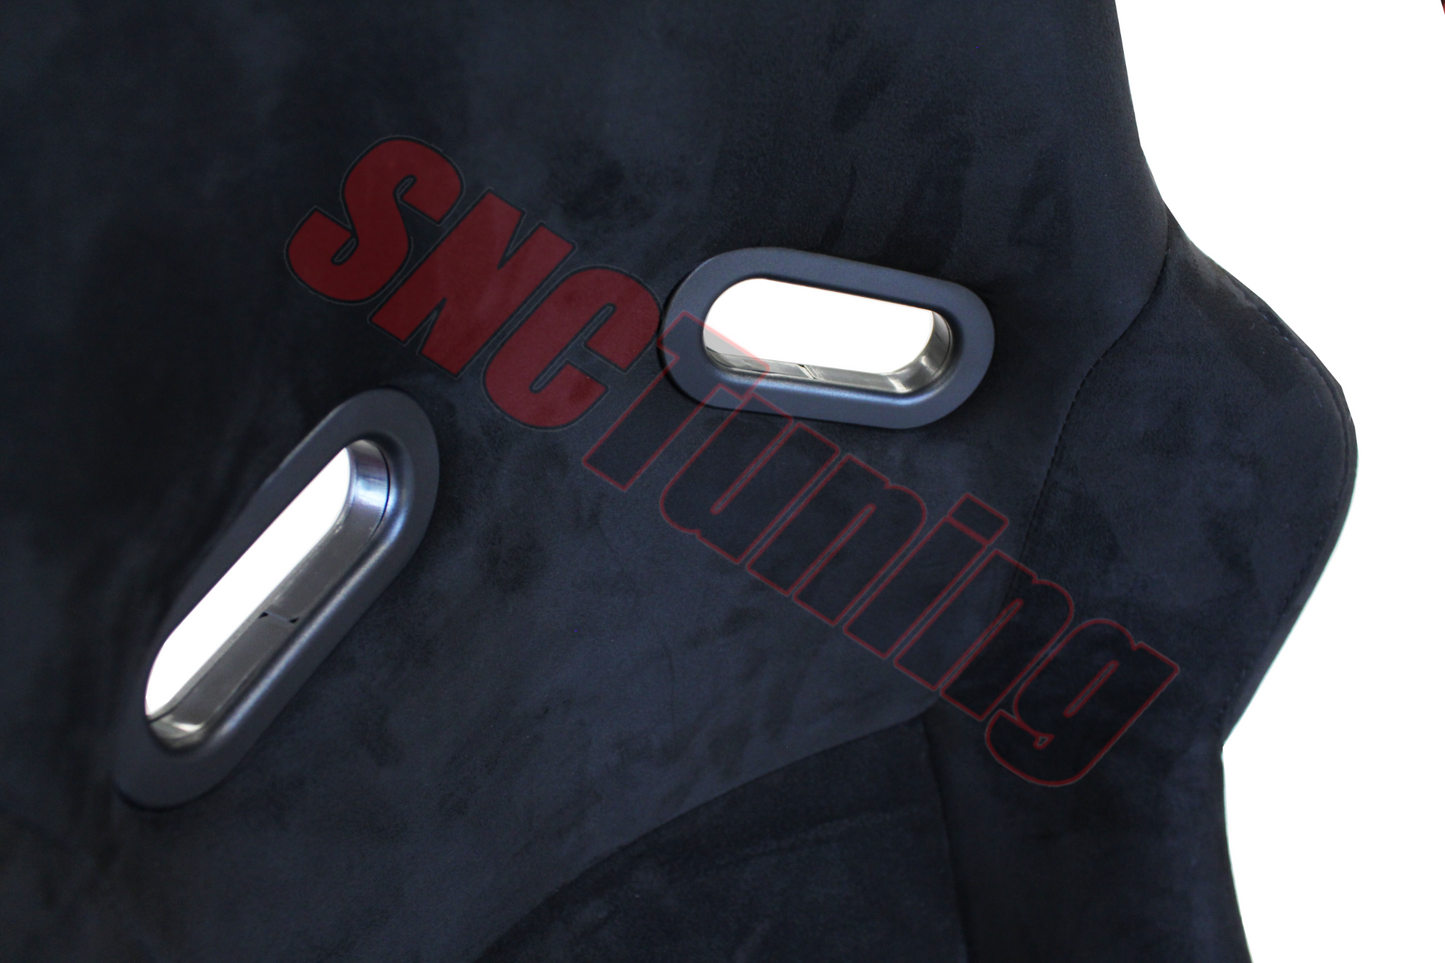 SNC Tuning VS3 Full Bucket Racing Seat Black - Suede Silver Sparkle Shell (Large)